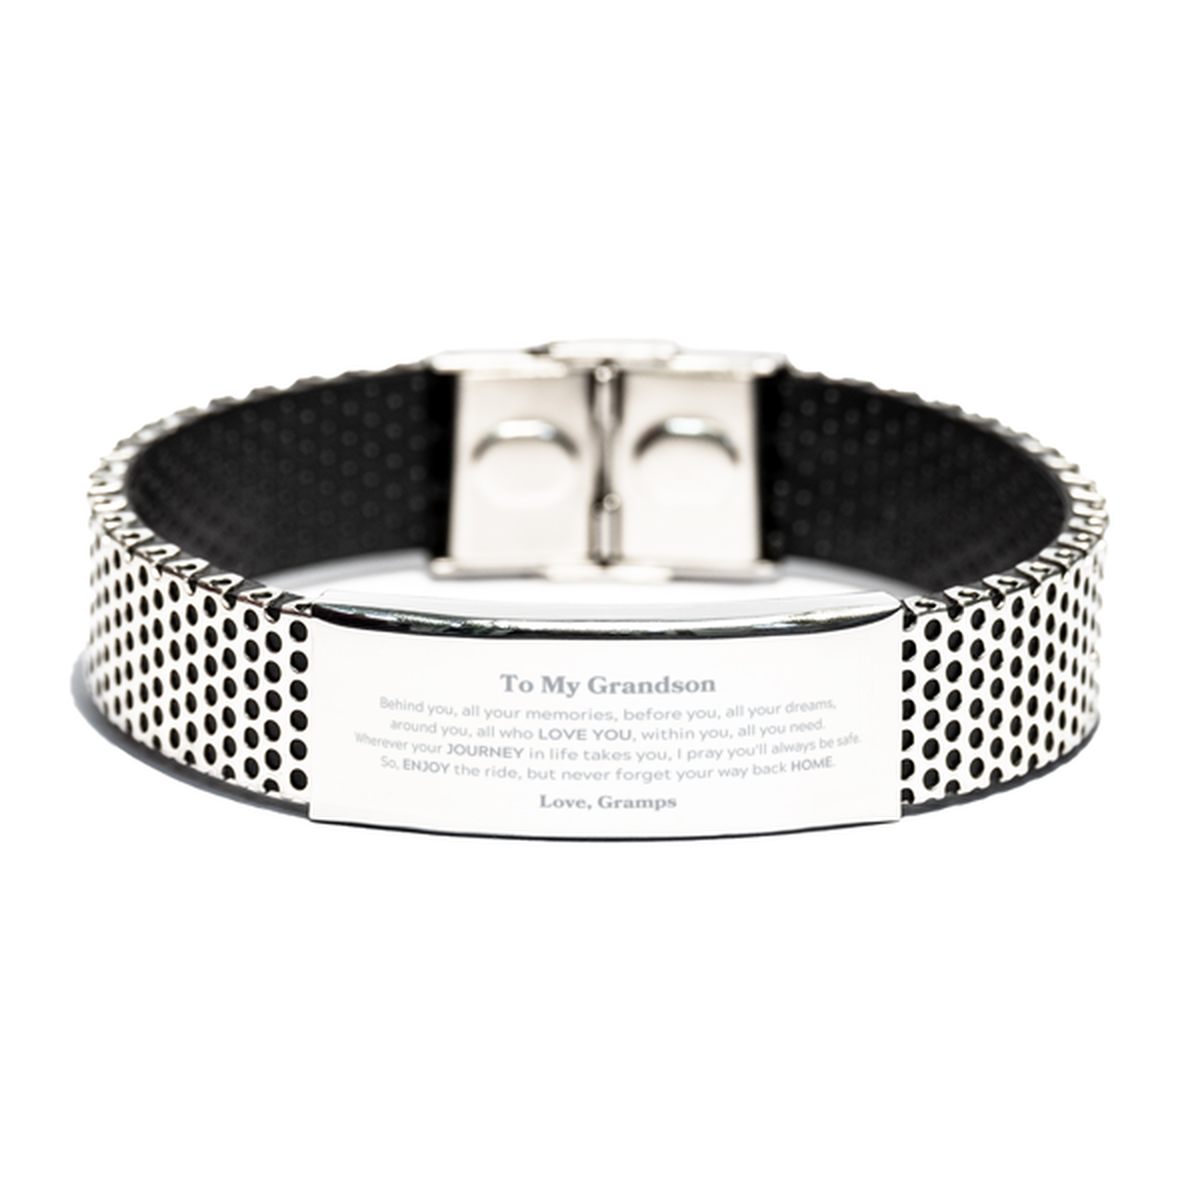 To My Grandson Graduation Gifts from Gramps, Grandson Stainless Steel Bracelet Christmas Birthday Gifts for Grandson Behind you, all your memories, before you, all your dreams. Love, Gramps